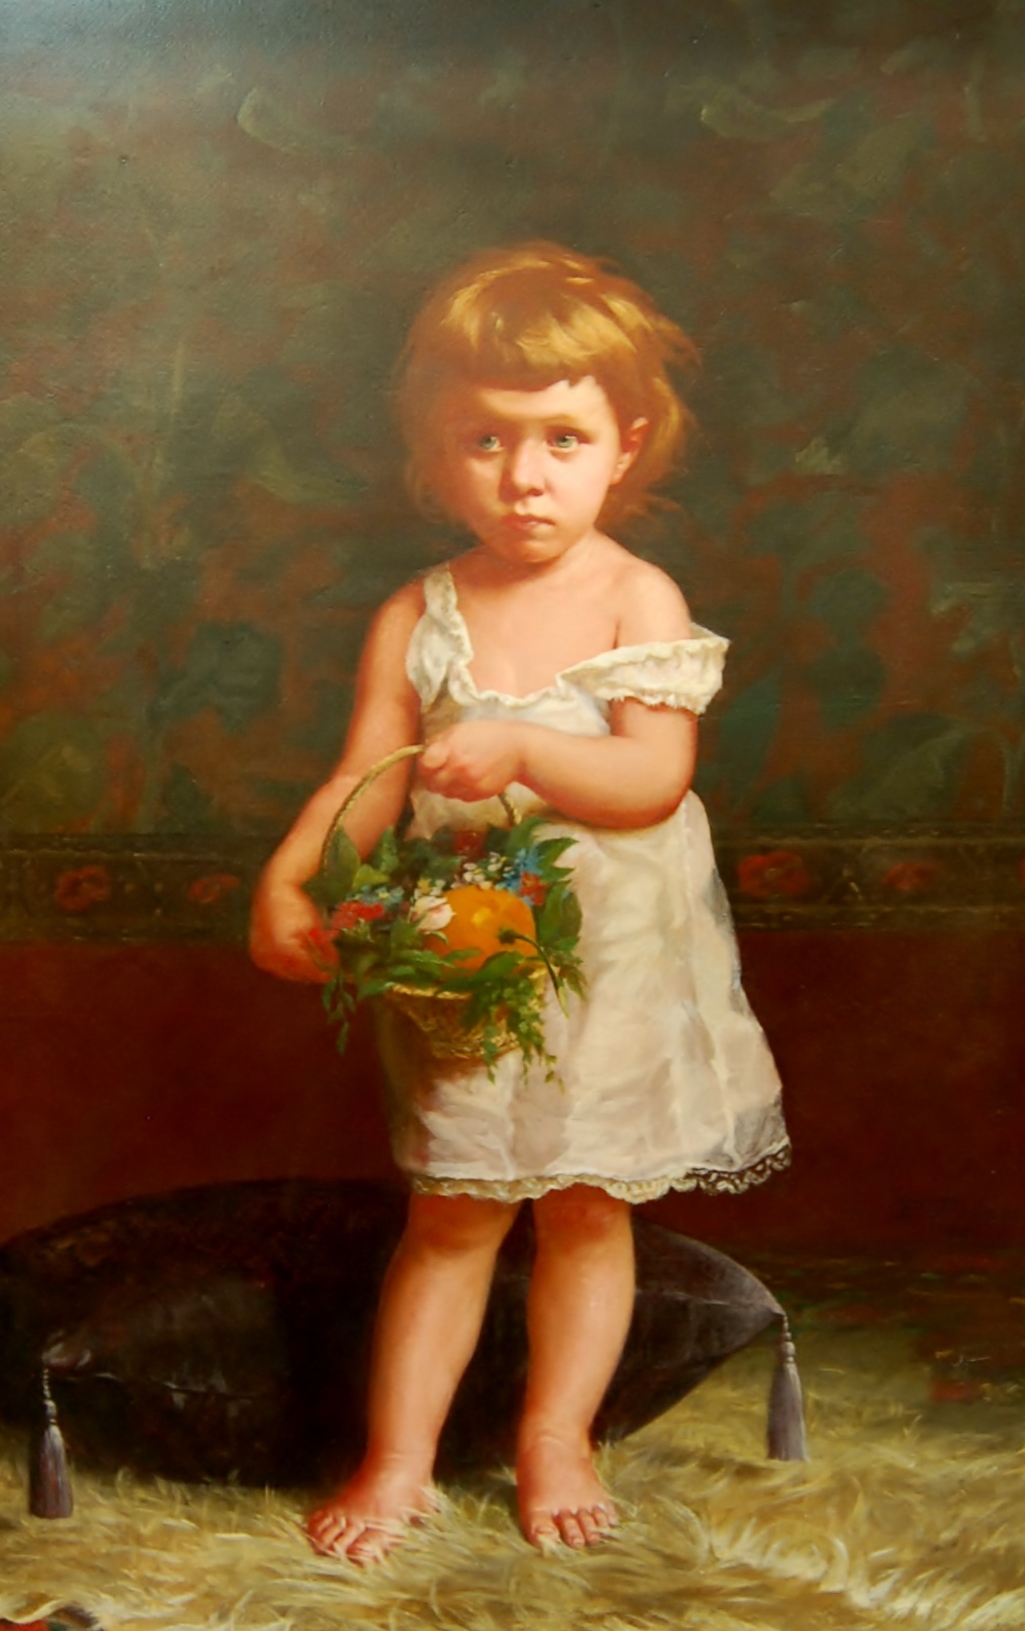 Portrait of a Little Girl with a Basket of Flowers and Orange